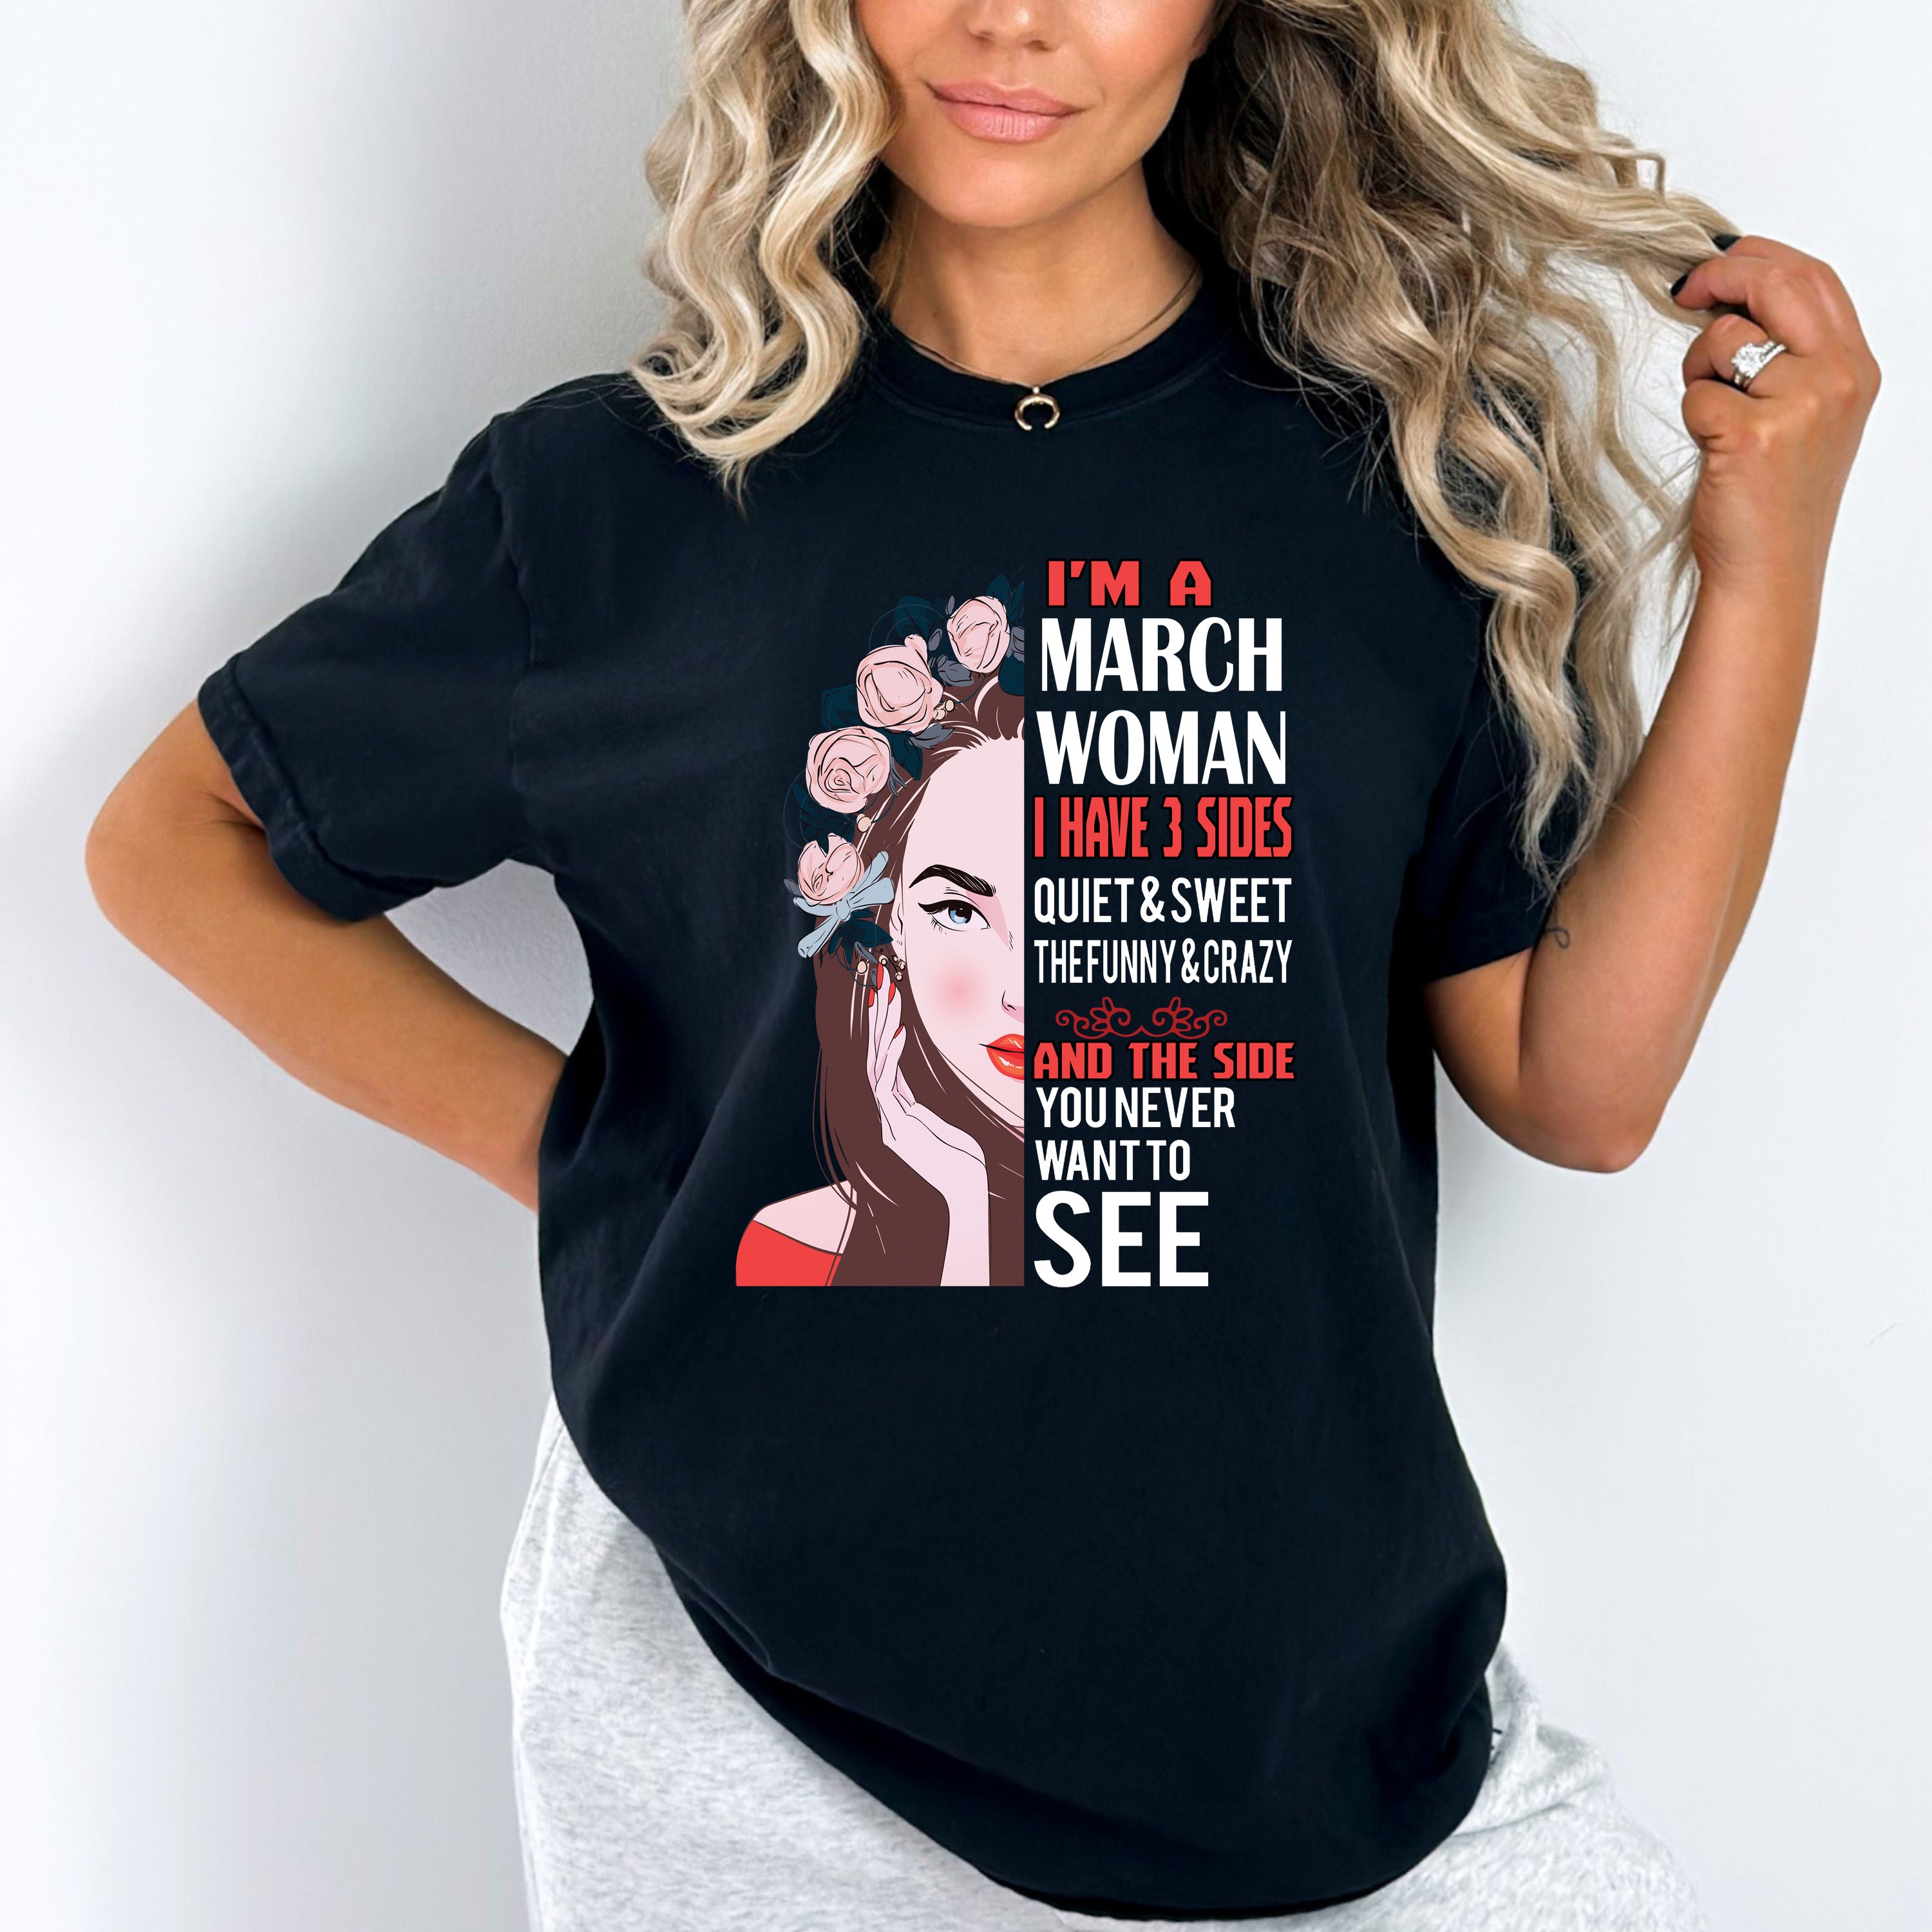 "I'M A MARCH WOMAN I HAVE 3 SIDES"